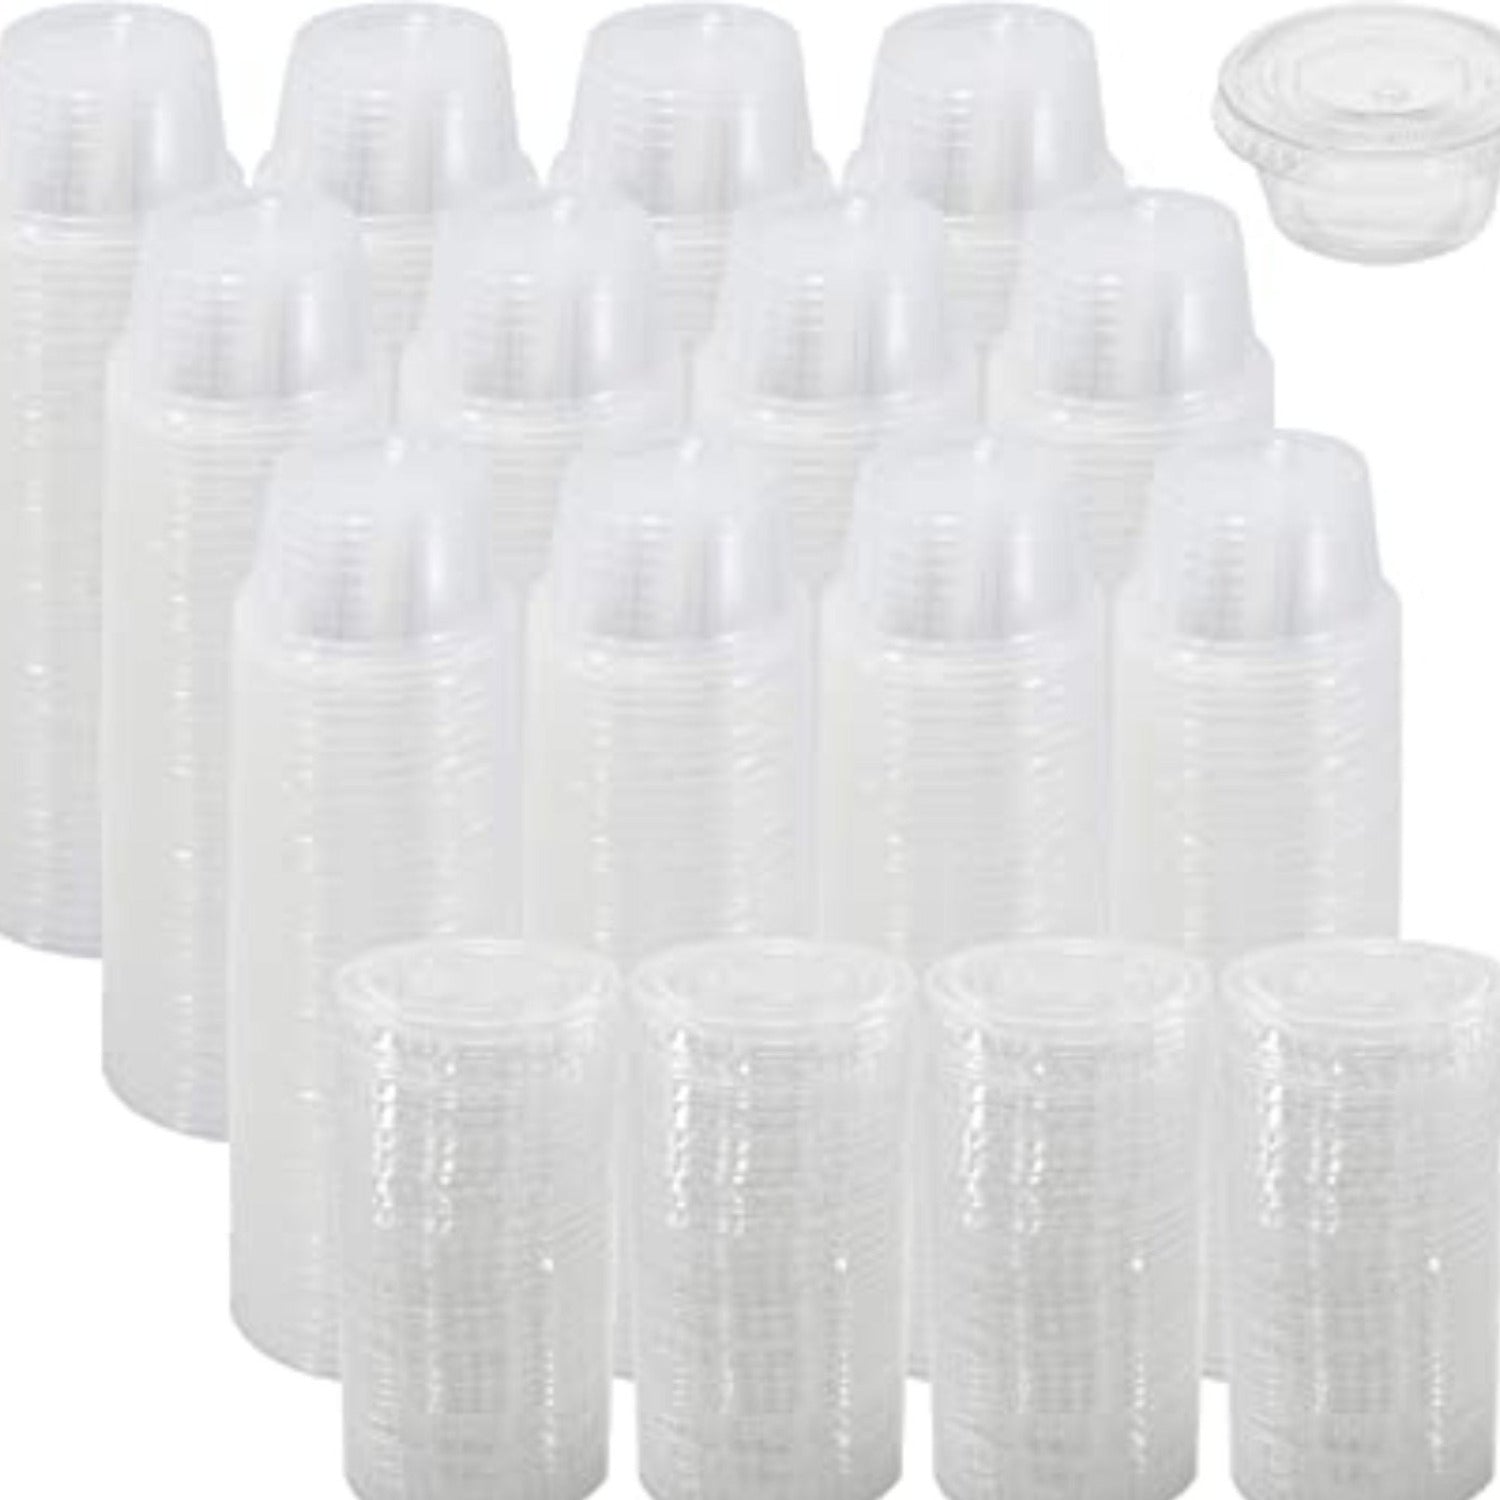 Nicole Home Collection Portion Cups with Lids Clear 2 oz